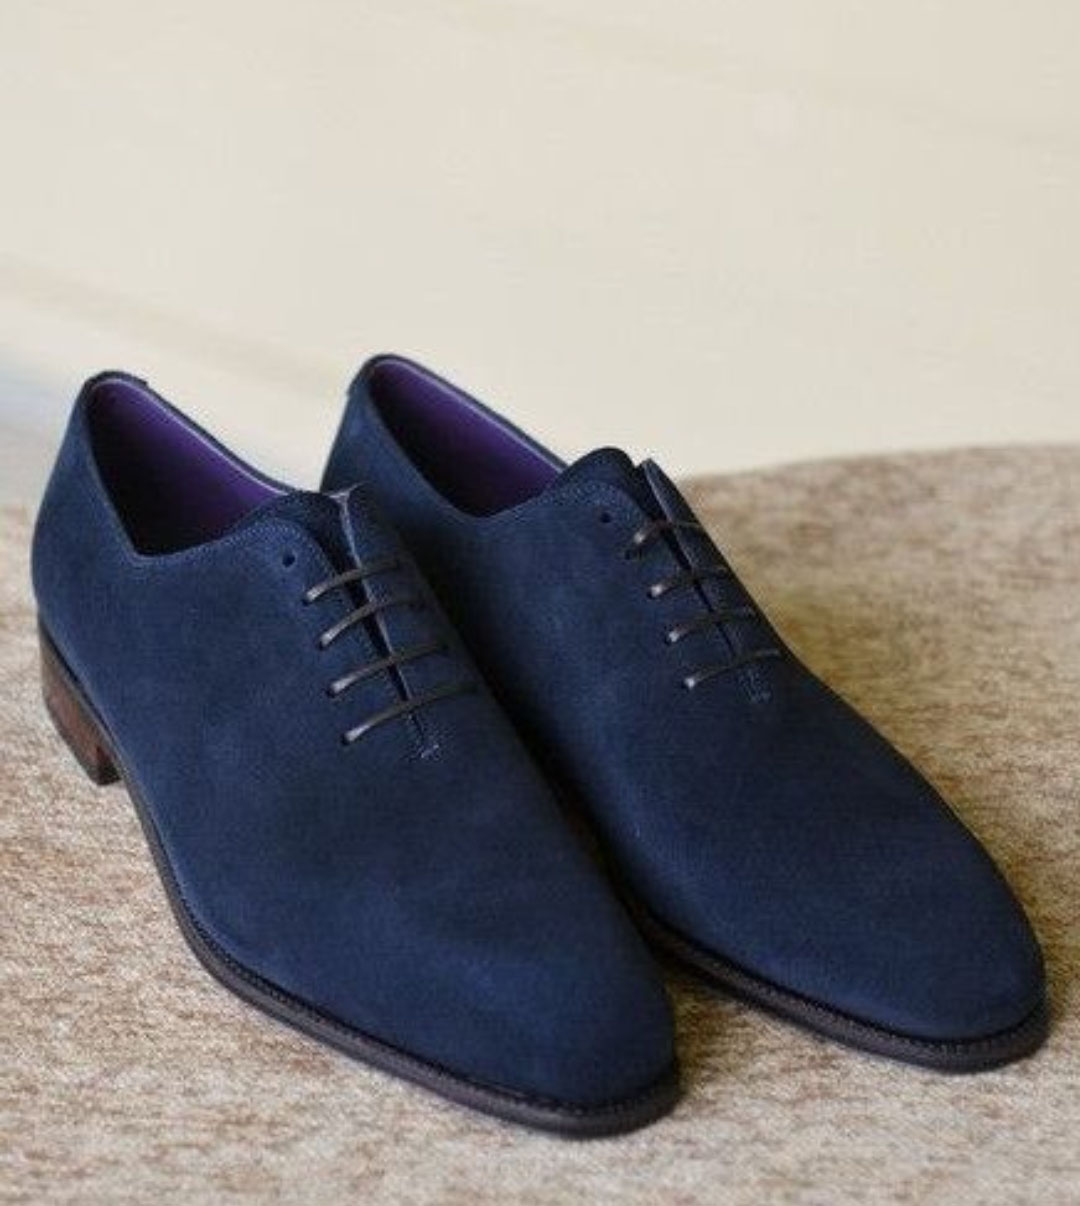 Handmade Navy Blue Color Suede Shoes 